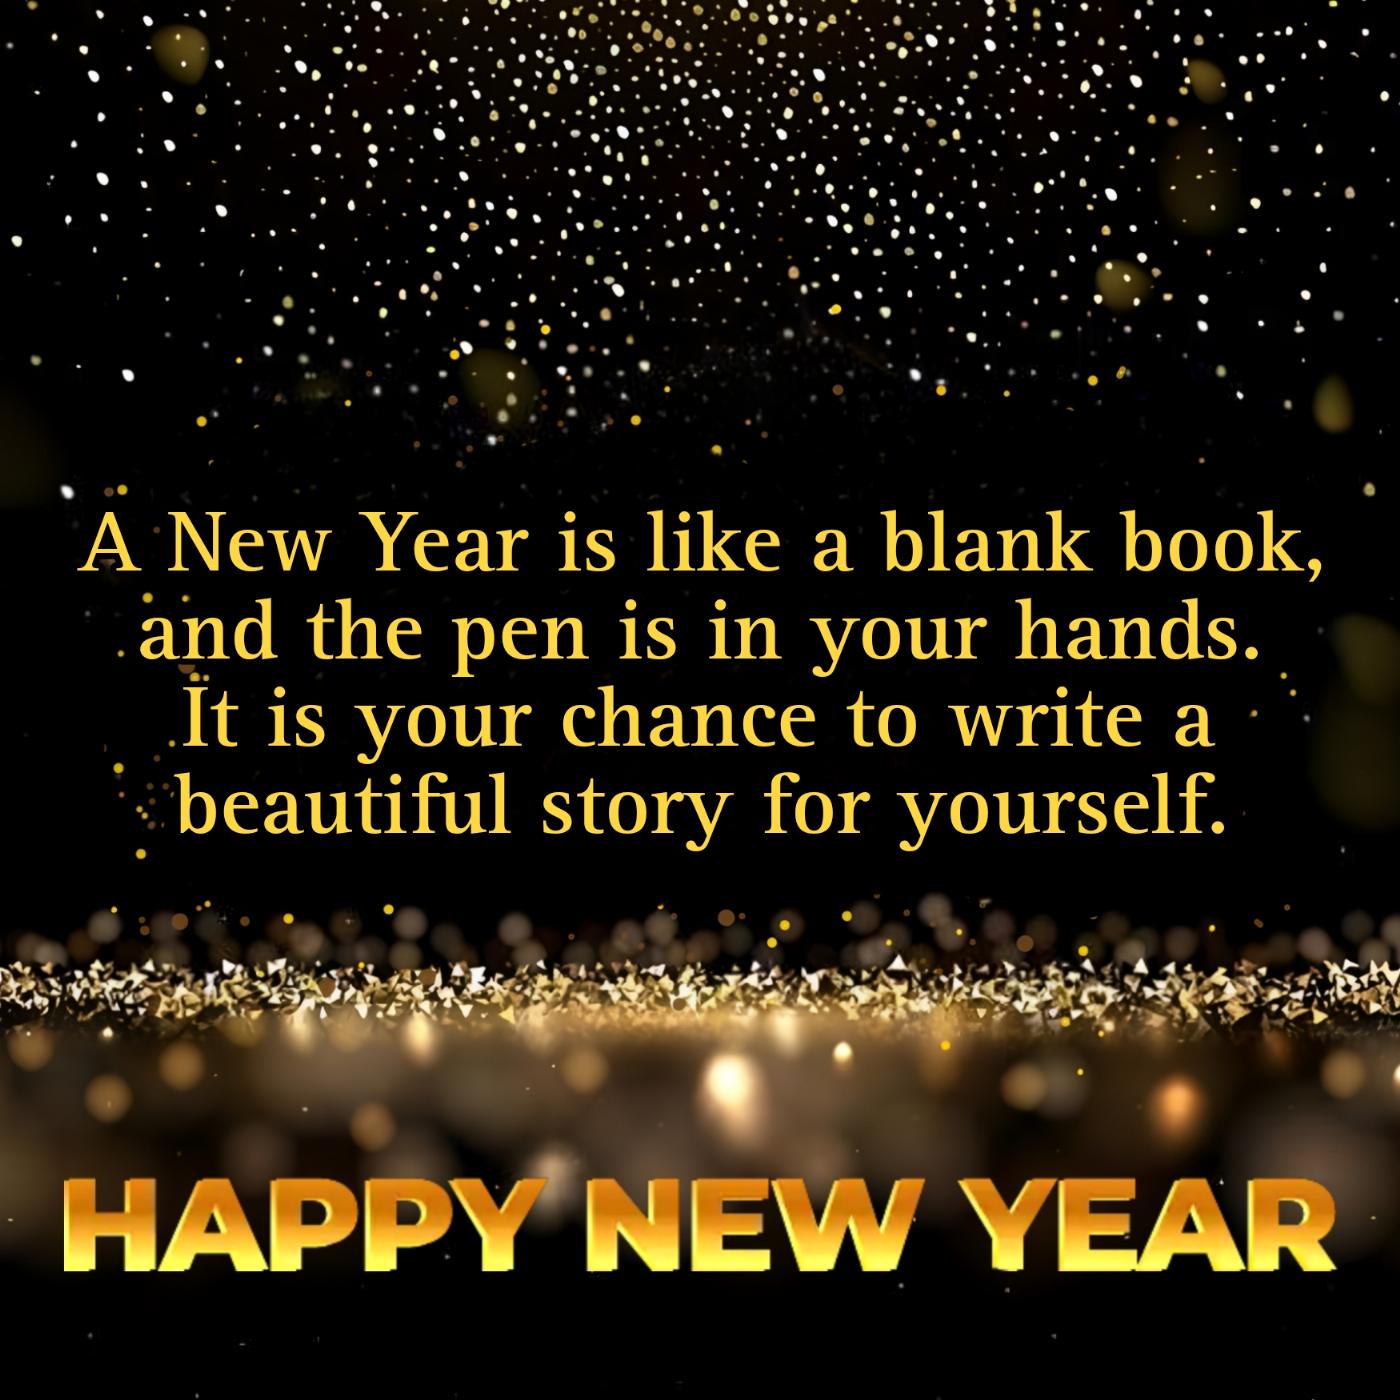 A New Year is like a blank book